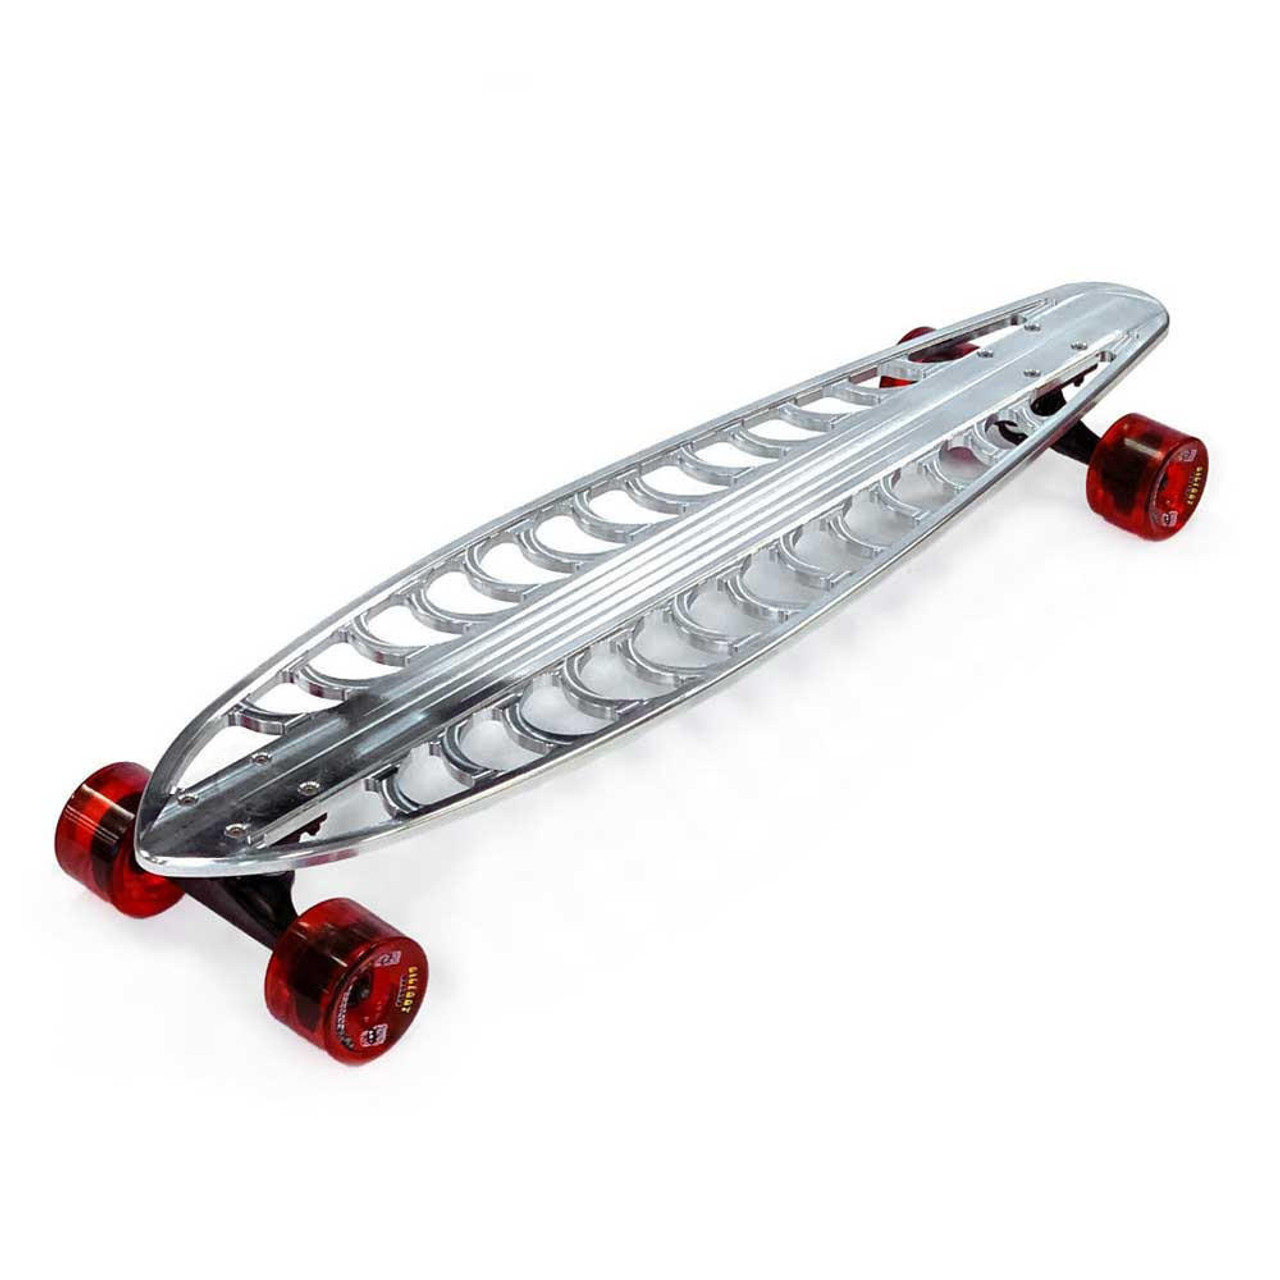 INC | Parts, Accessories, and Built UTVs | SXS - Side By Side 36" Billet CNC Machined Longboard Skate Board Complete UTV INC | Parts, Accessories, and Custom Built